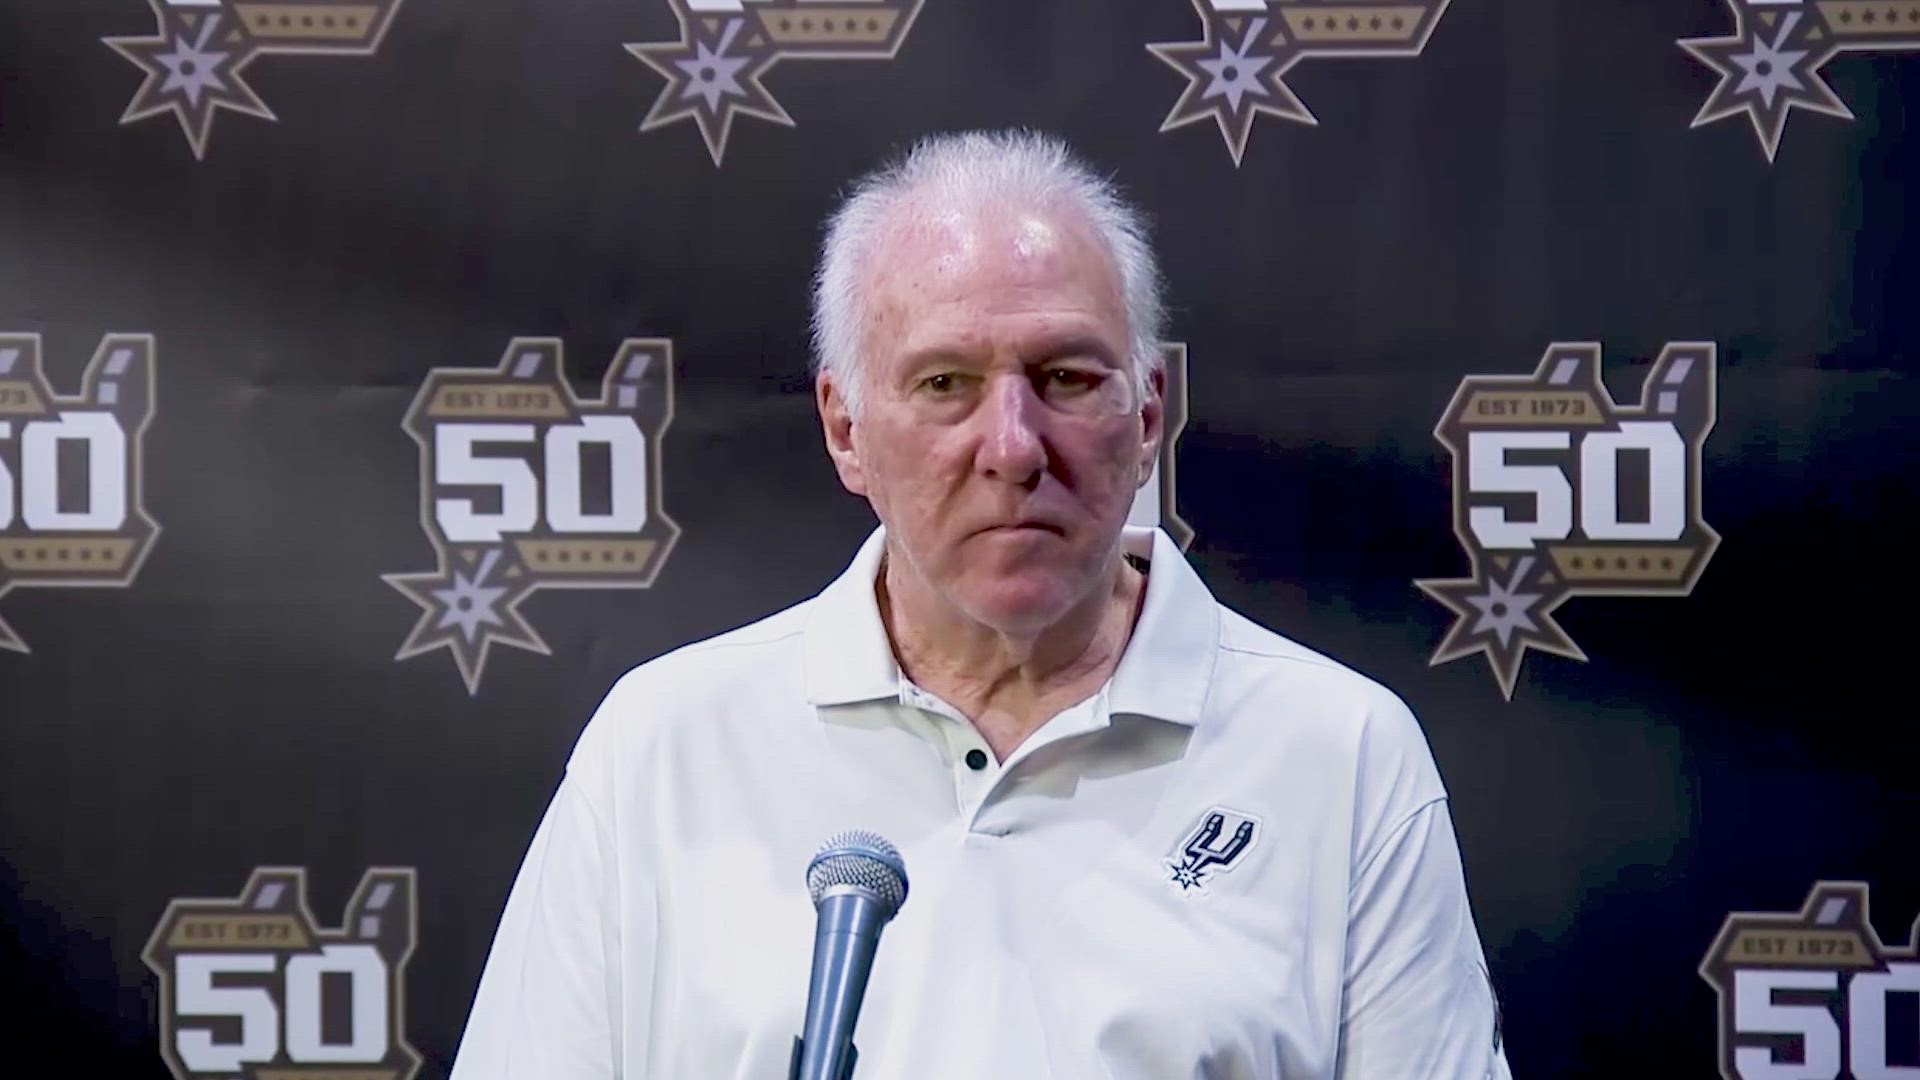 Pop said not to bet on the Spurs to win a title, and that the point for this year is to set this young group up to have long and successful NBA careers.